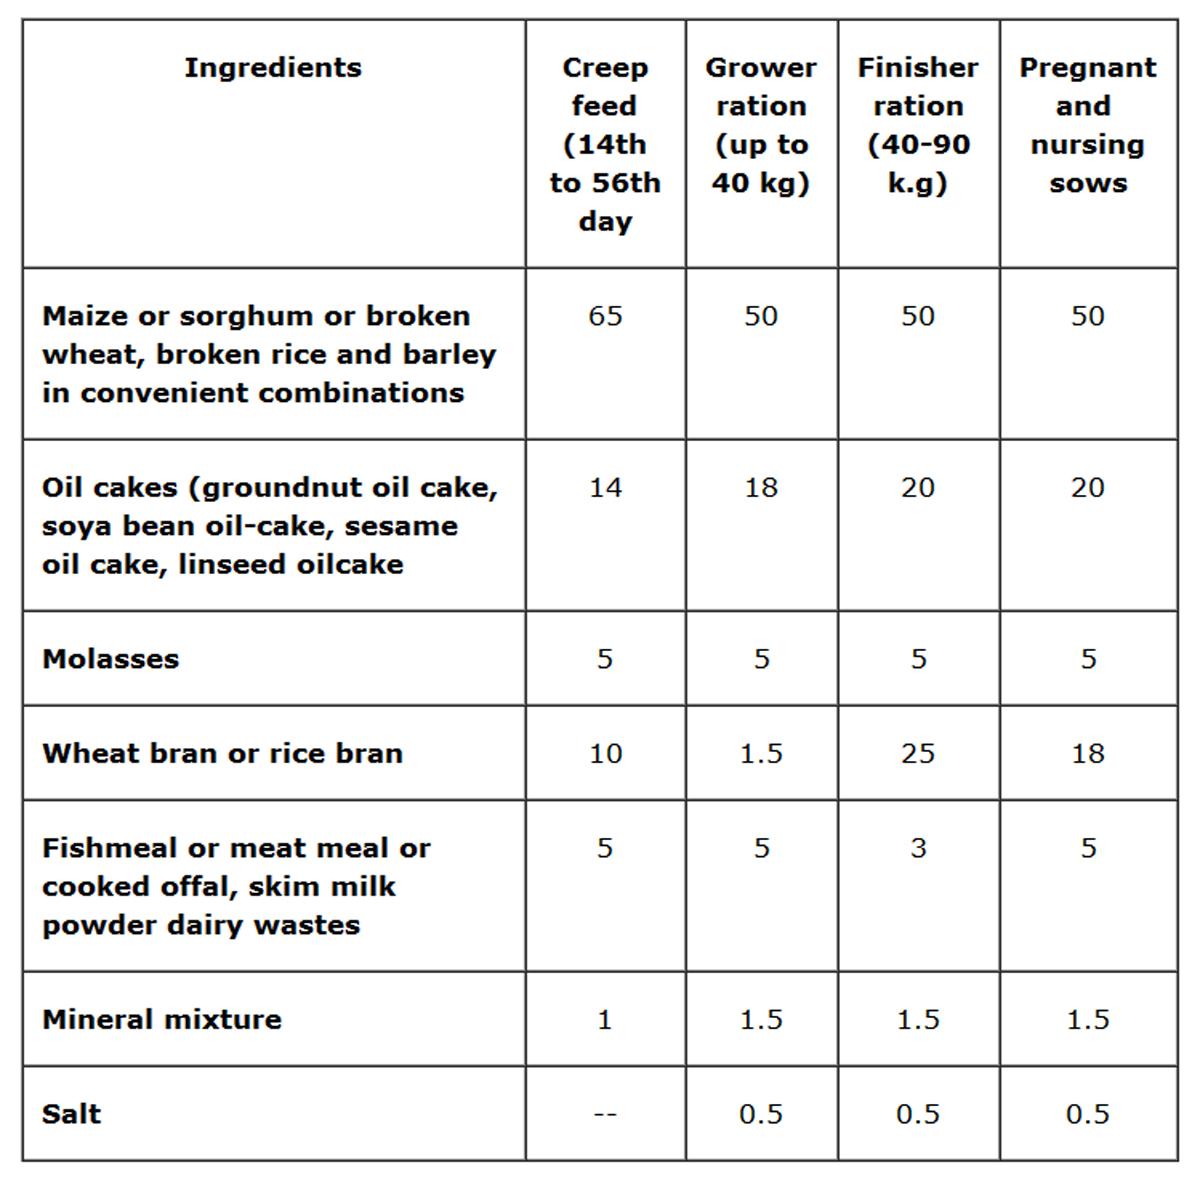 Pig Feed Consumption Chart